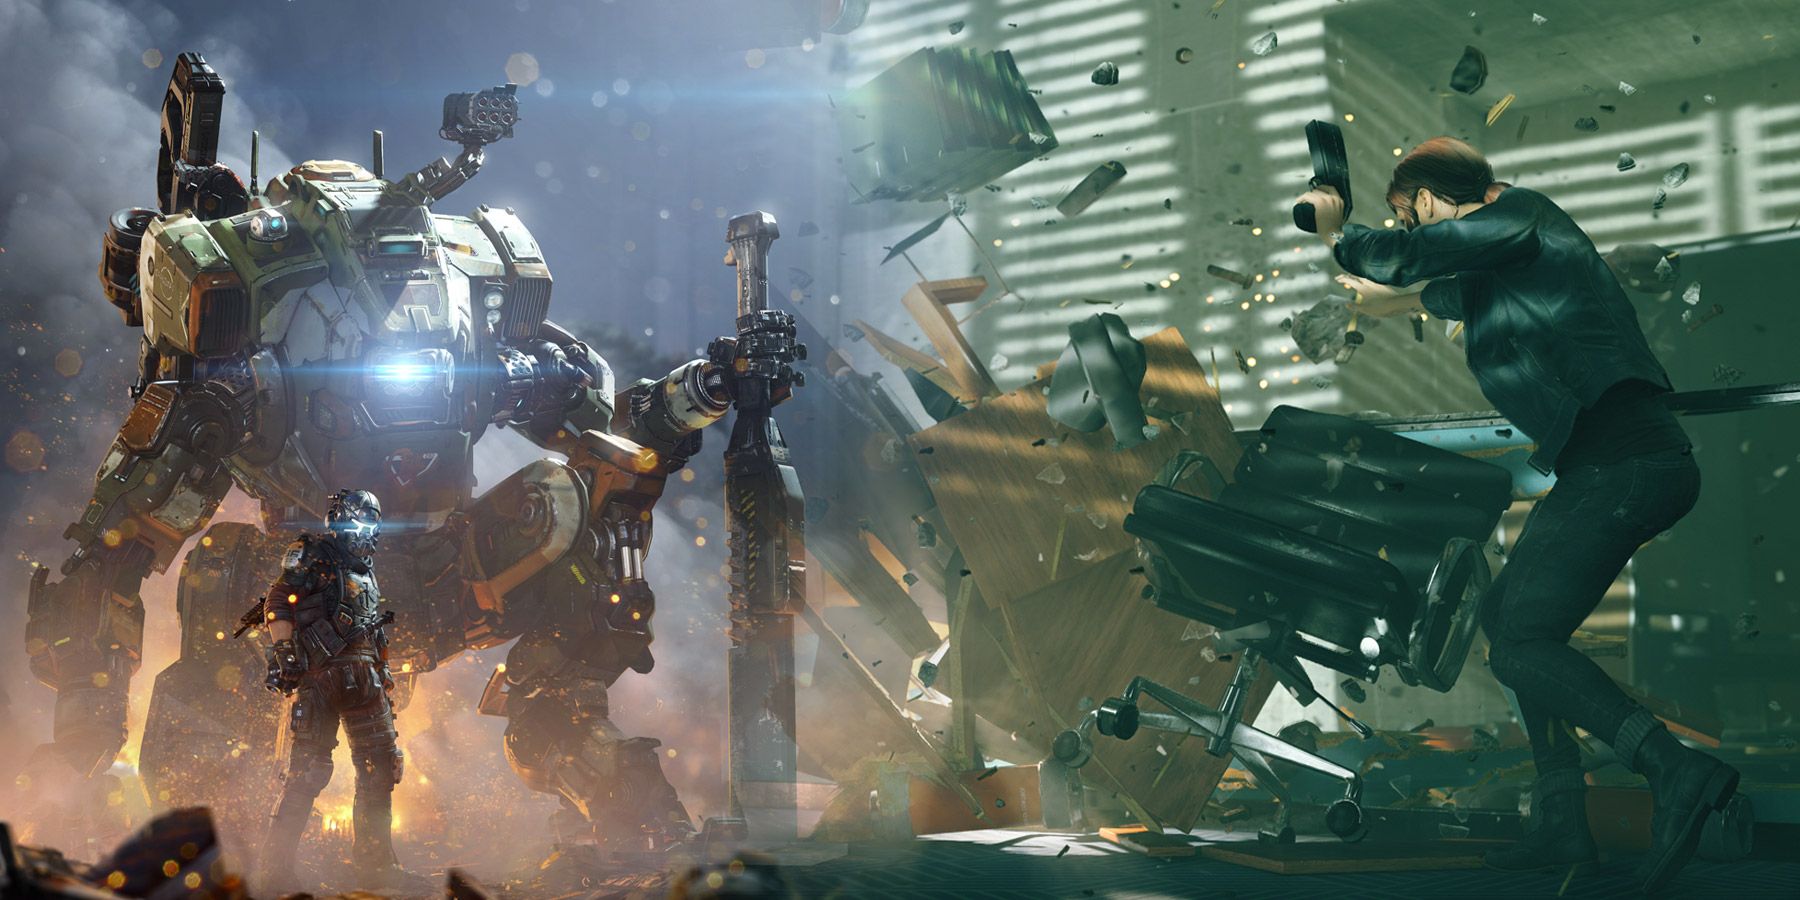 Rumor: Titanfall 3 Is In Development At Respawn